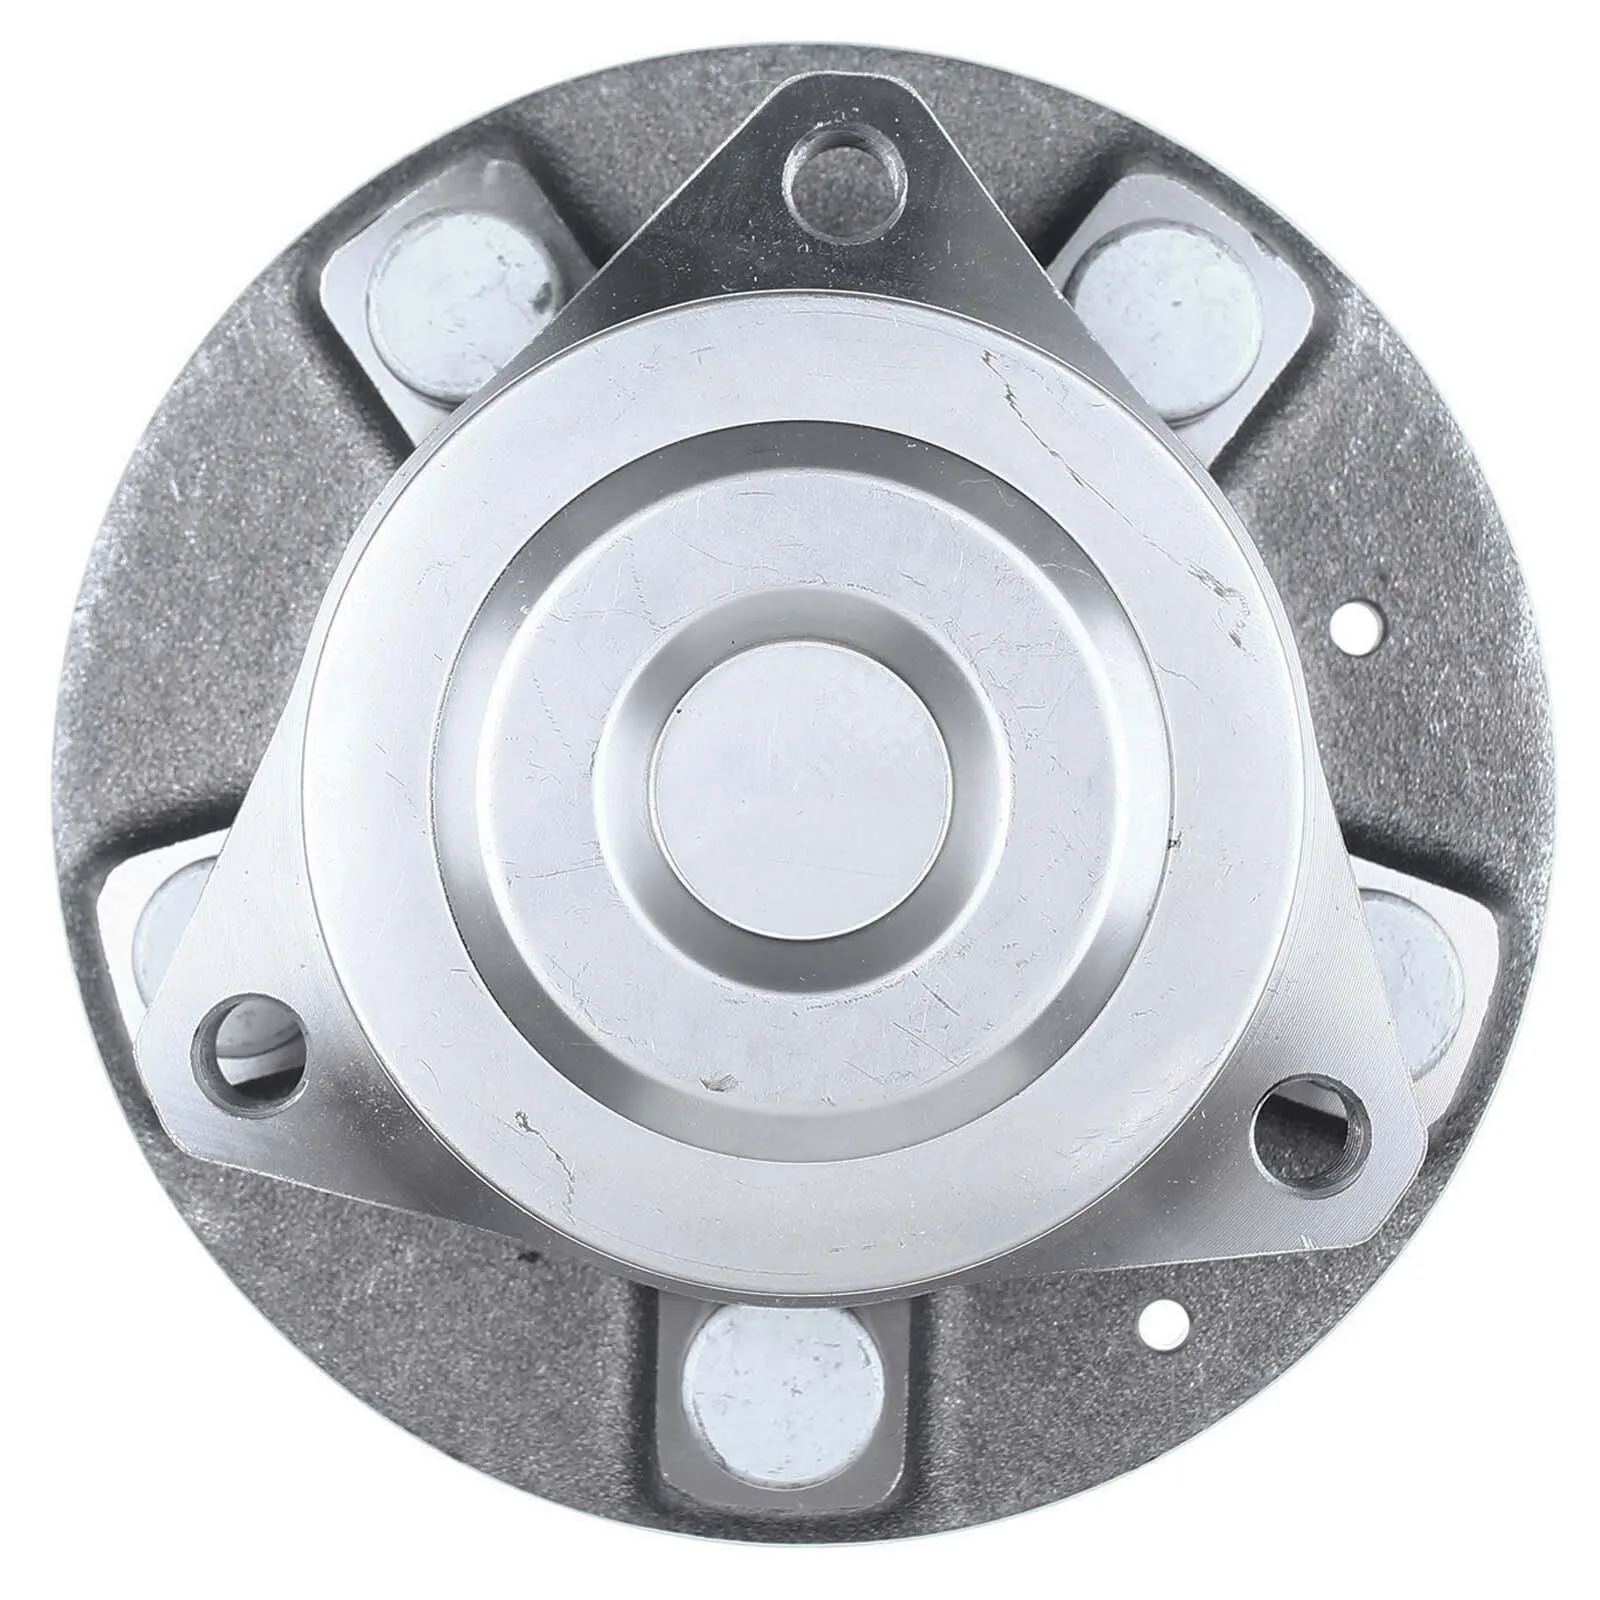 

A3 Wholesales 1x Left or Right Wheel Hub Bearing Assembly for Chevrolet Camaro Buick Cadillac